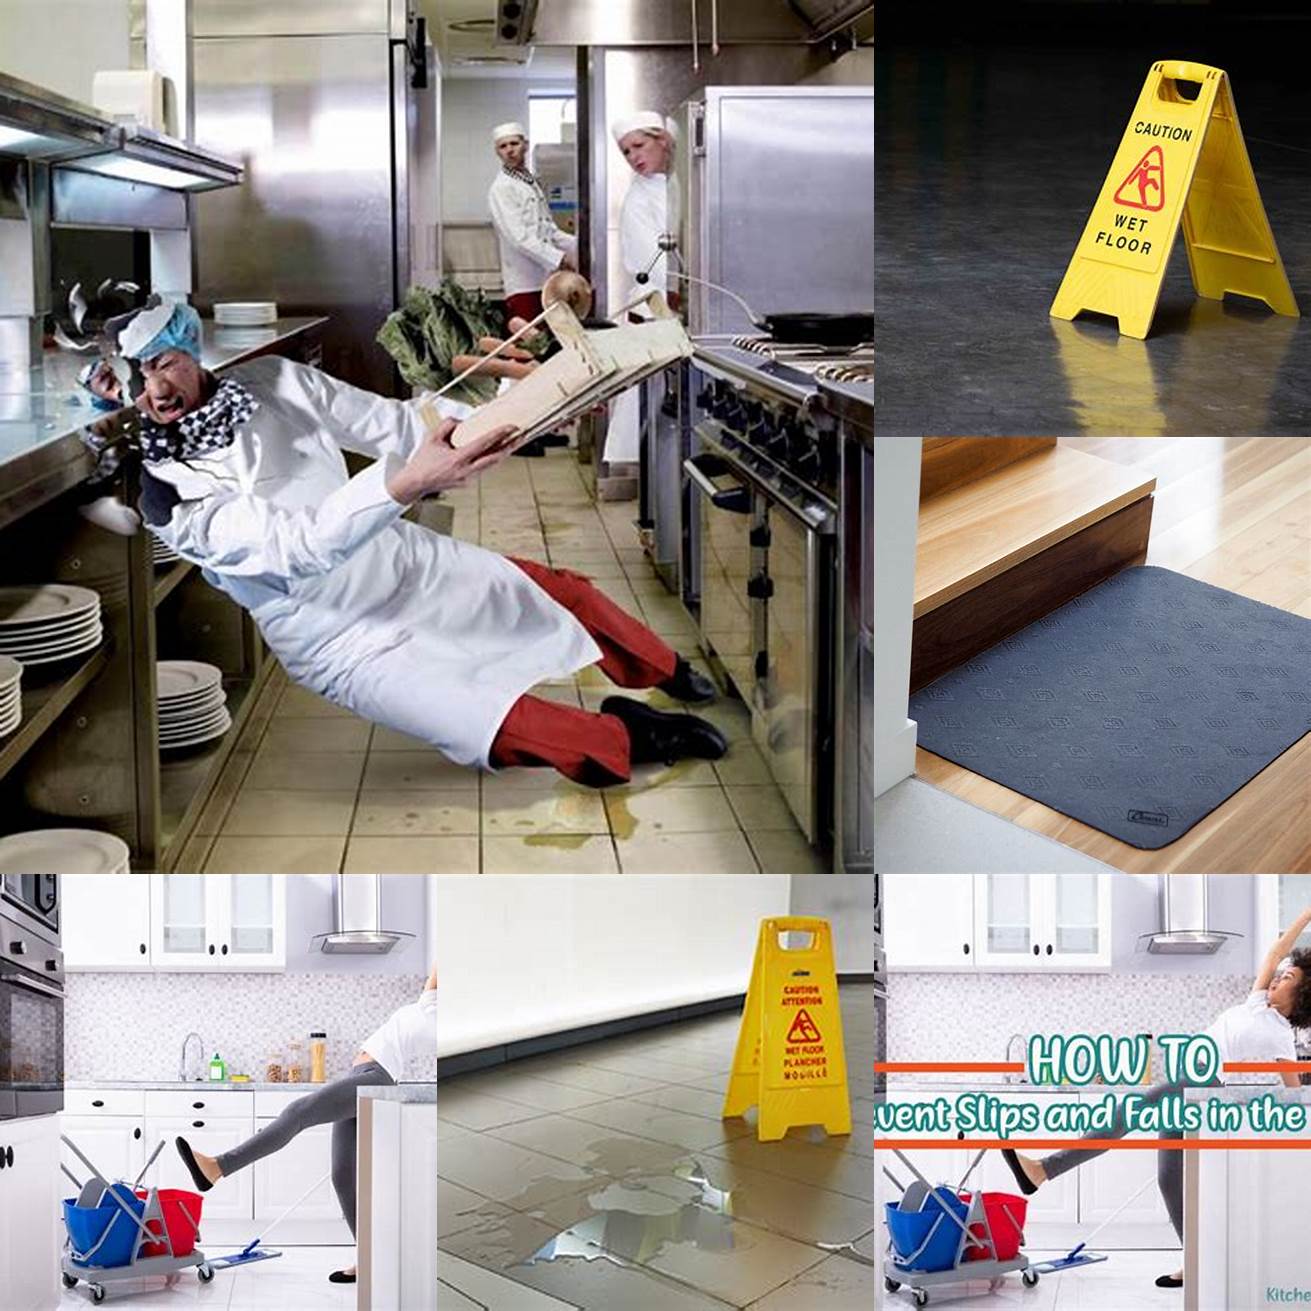 Prevents slips and falls - Kitchen floors can be slippery especially when wet A floor mat with a non-slip backing can help prevent accidents